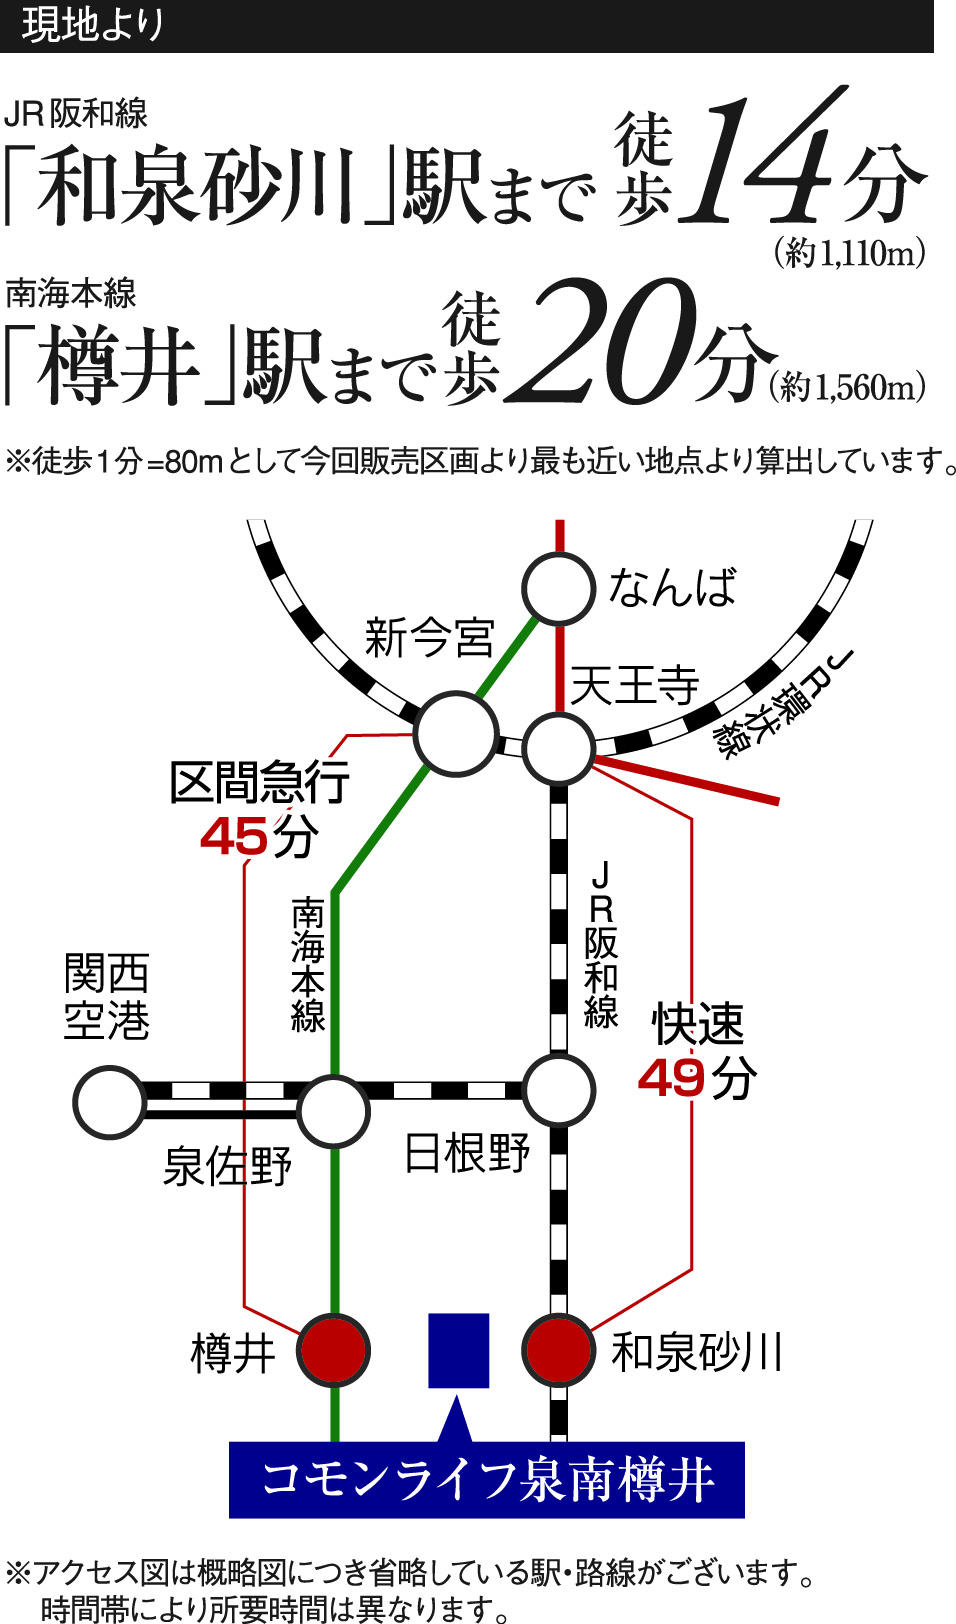 route map. 2-wire 2 station is available. 